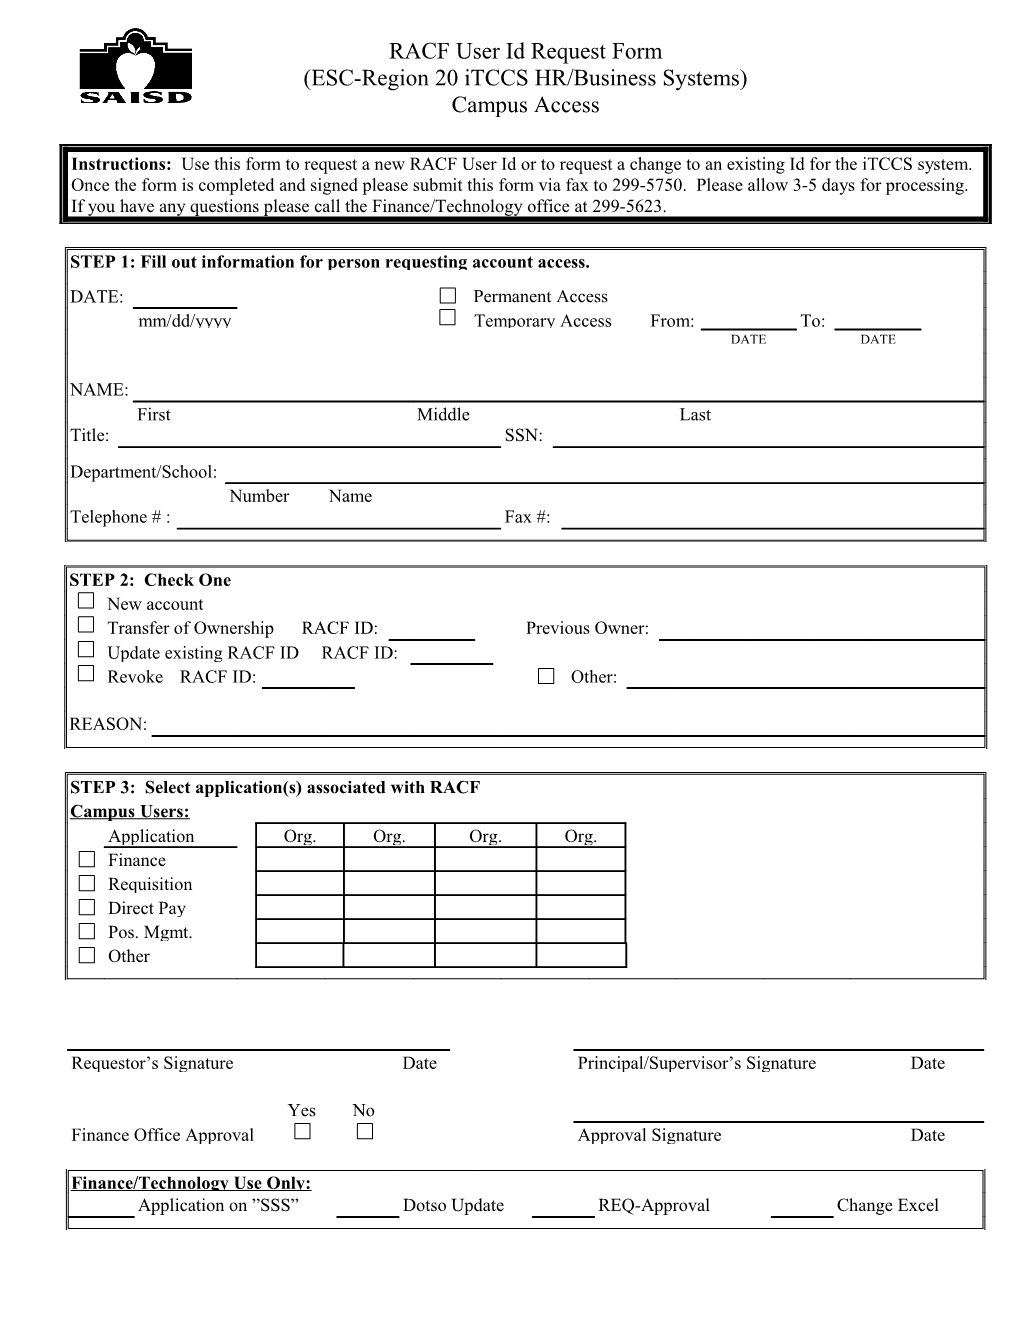 Instructions: Use This Form to Request a New RACF User ID Or to Request a Change to An